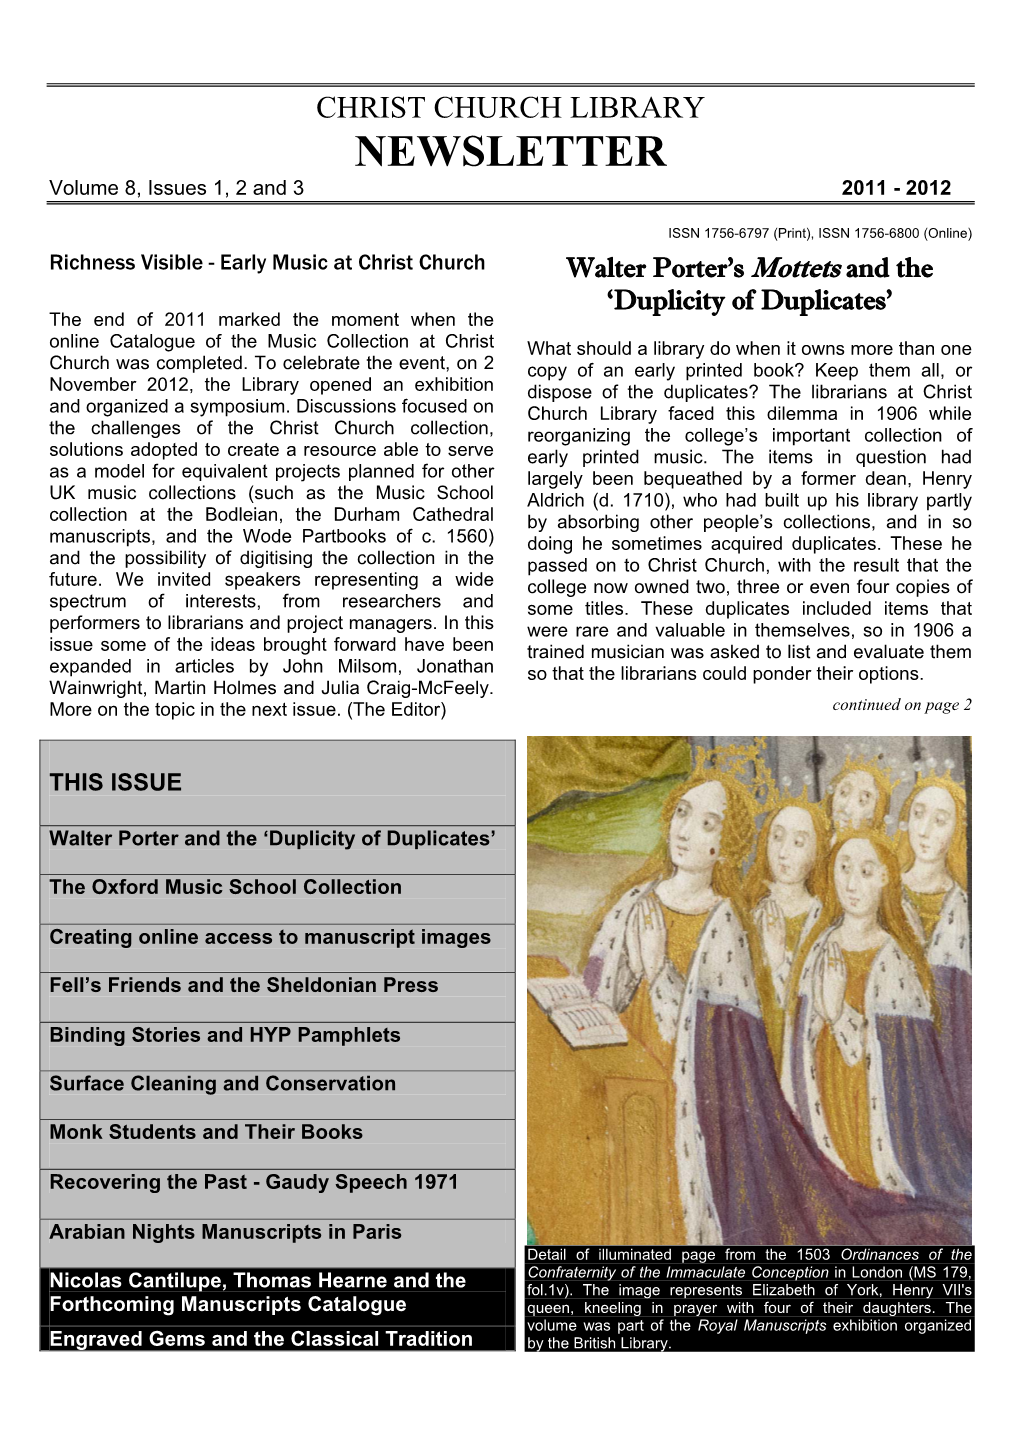 CHRIST CHURCH LIBRARY NEWSLETTER Volume 8, Issues 1, 2 and 3 2011 - 2012